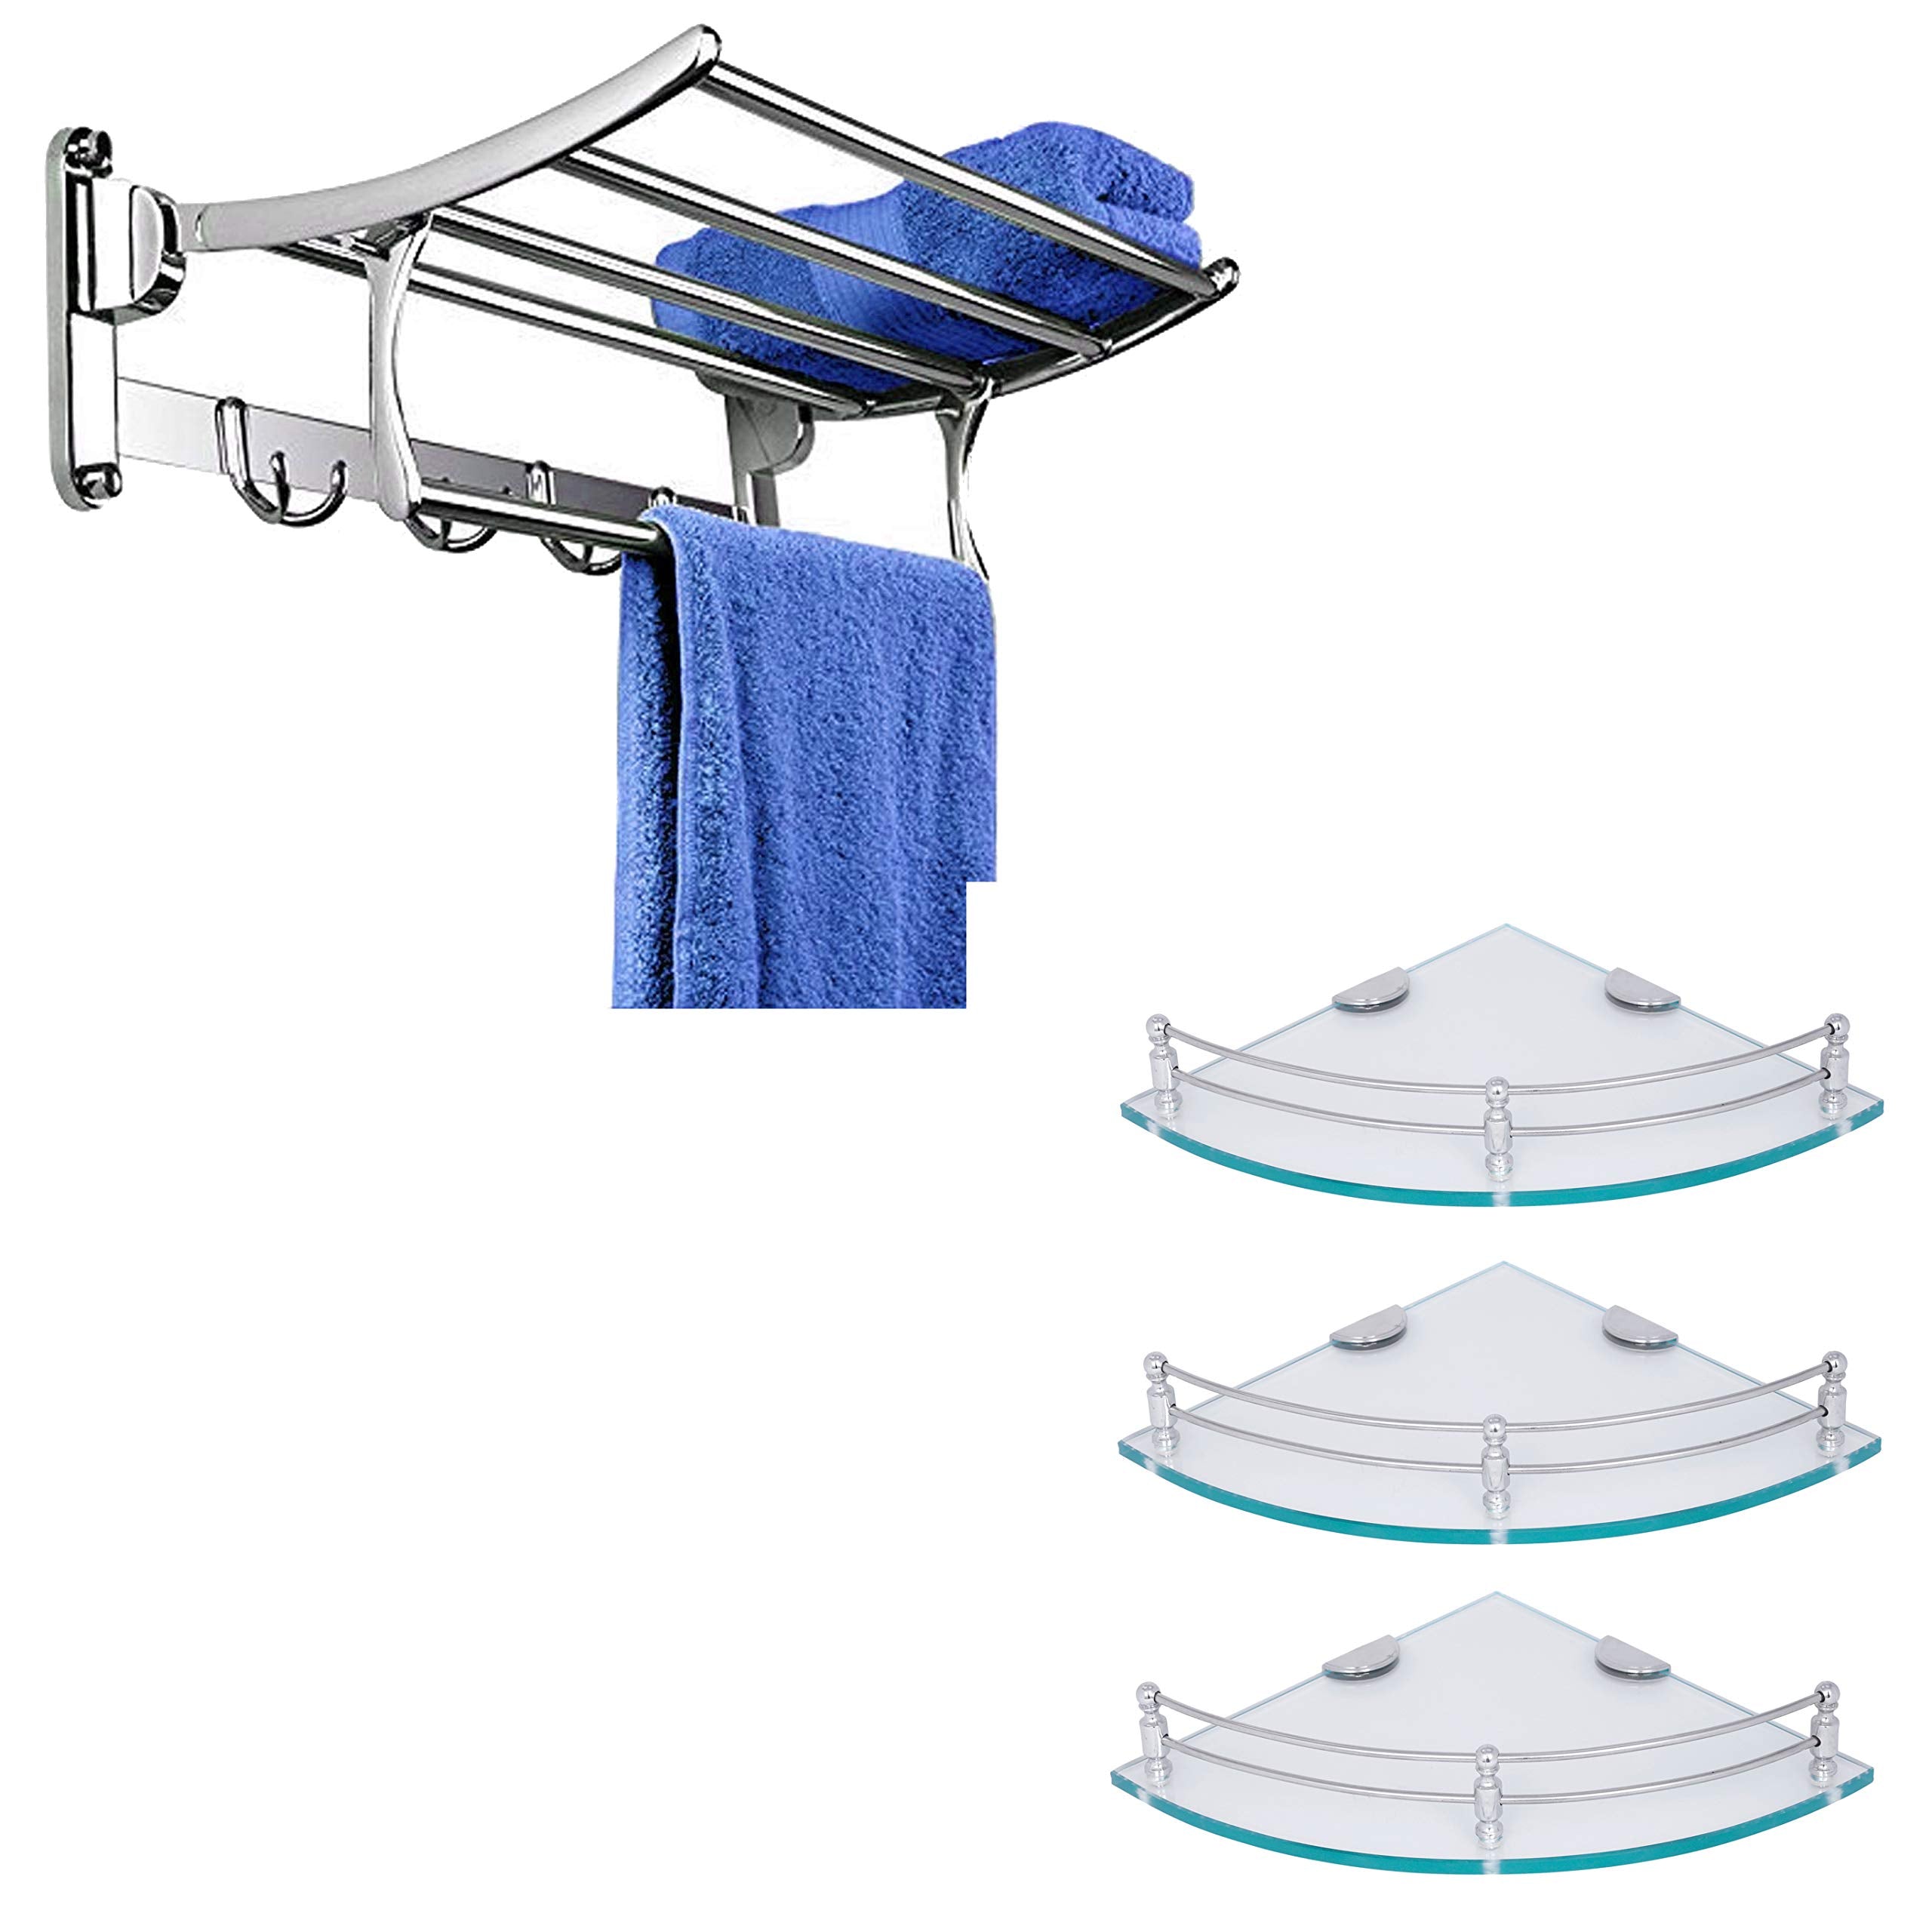 Plantex 24 Inches Stainless Steel Folding Towel Rack with Premium Glass Shelf/Bathroom Shelf Corner (9 X 9 Inches) - Pack of 3